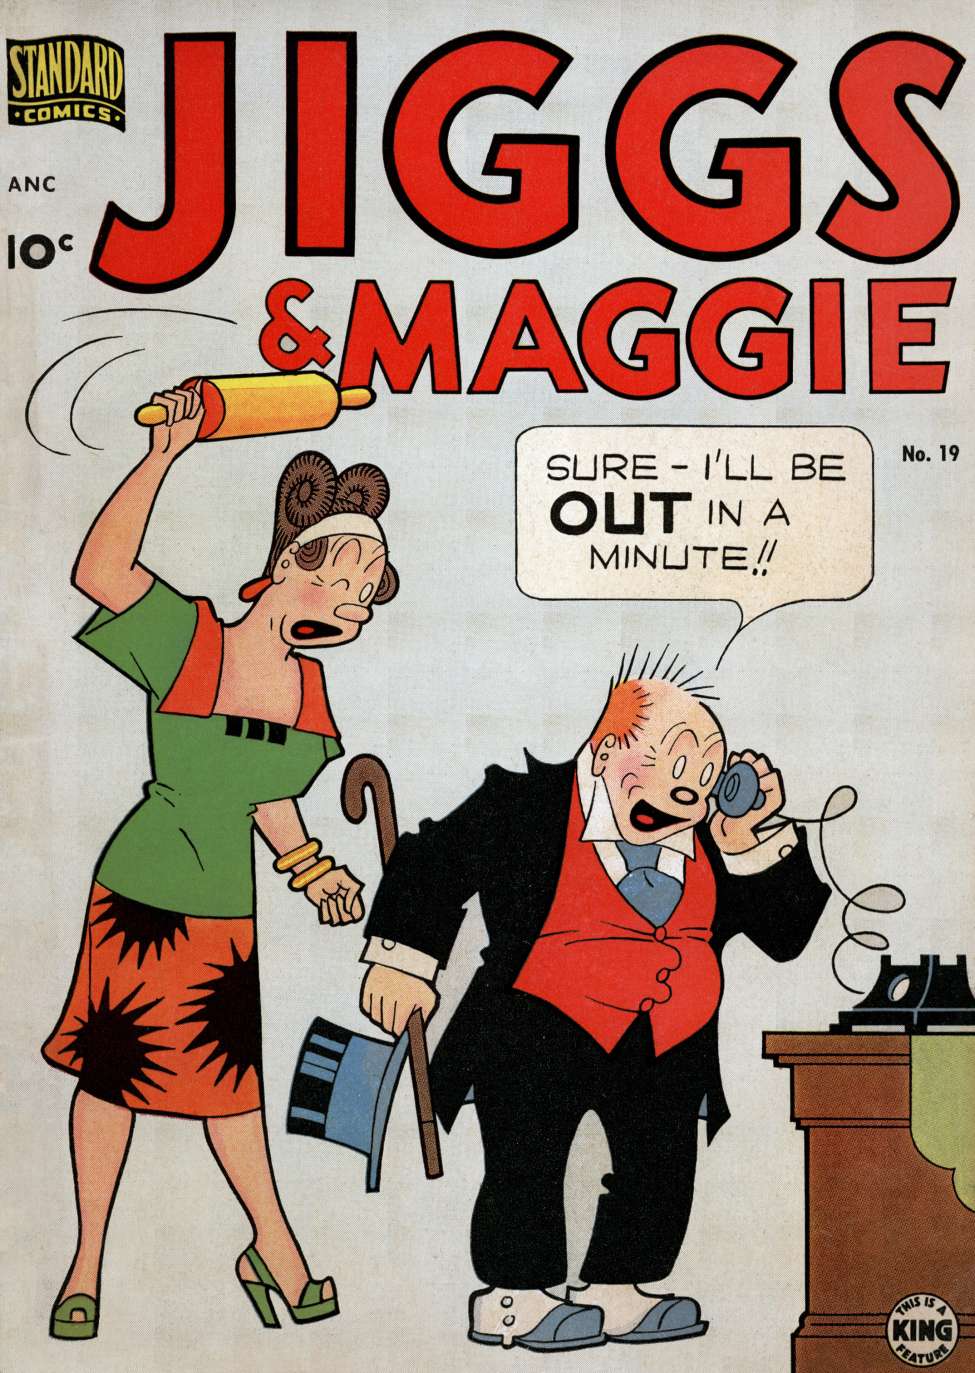 Book Cover For Jiggs & Maggie 19